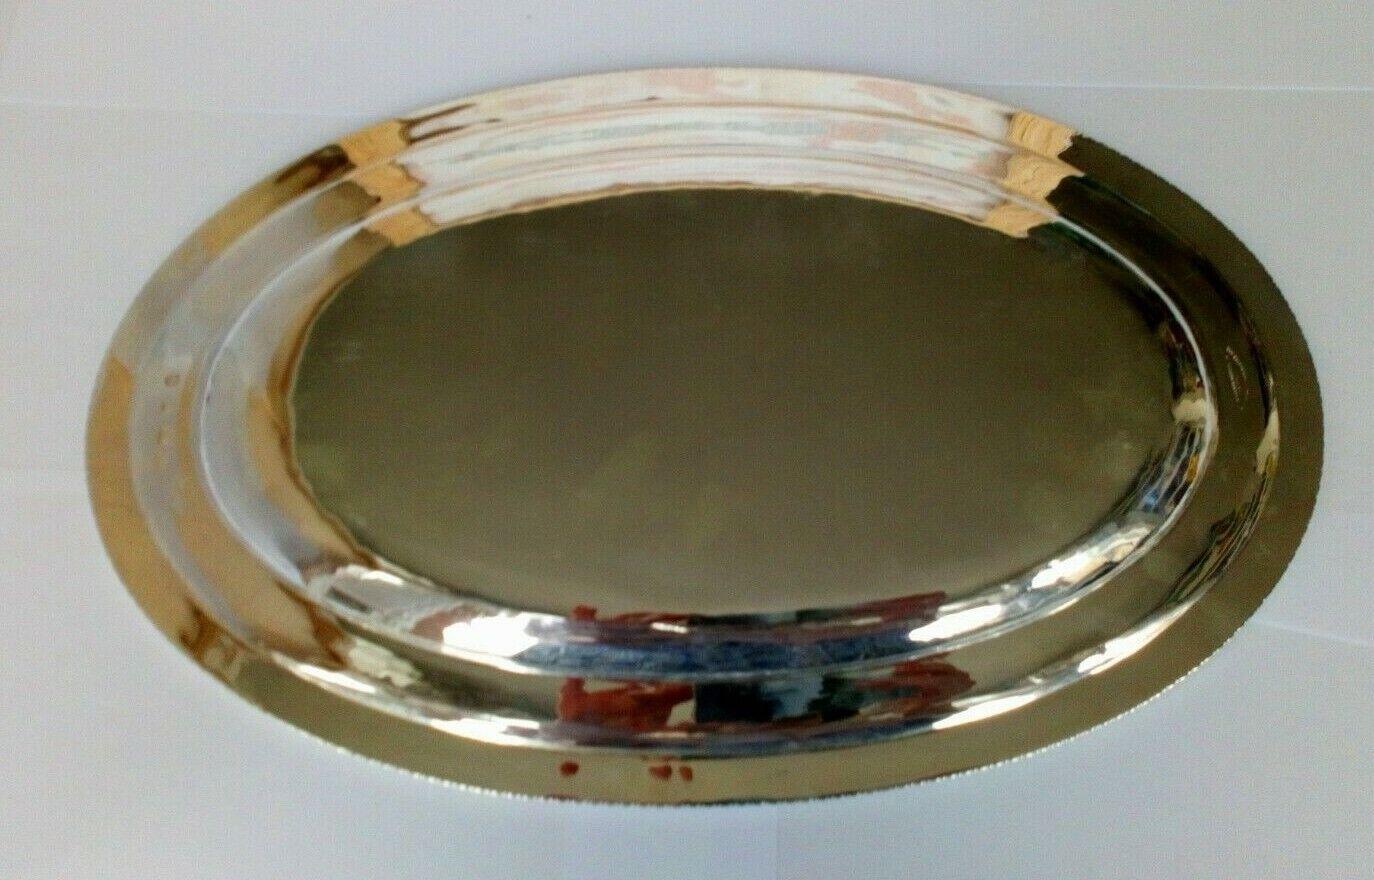 Women's or Men's Large Sterling Silver Tray by Goldsmiths & Silversmiths Co Ltd, 1933 For Sale